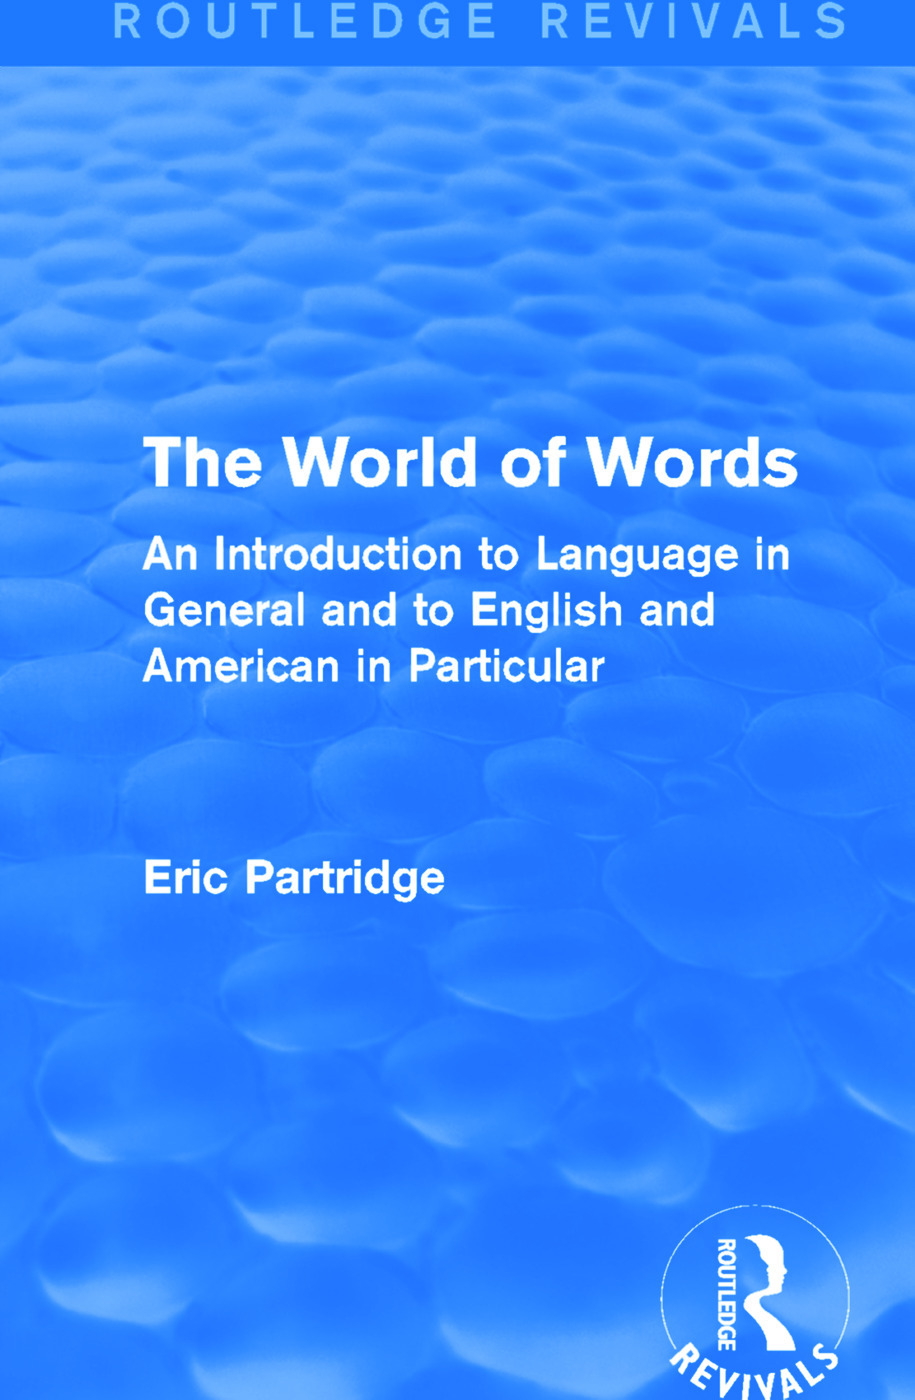 The World of Words  An Introduction to Language in General and to English and American in Particular